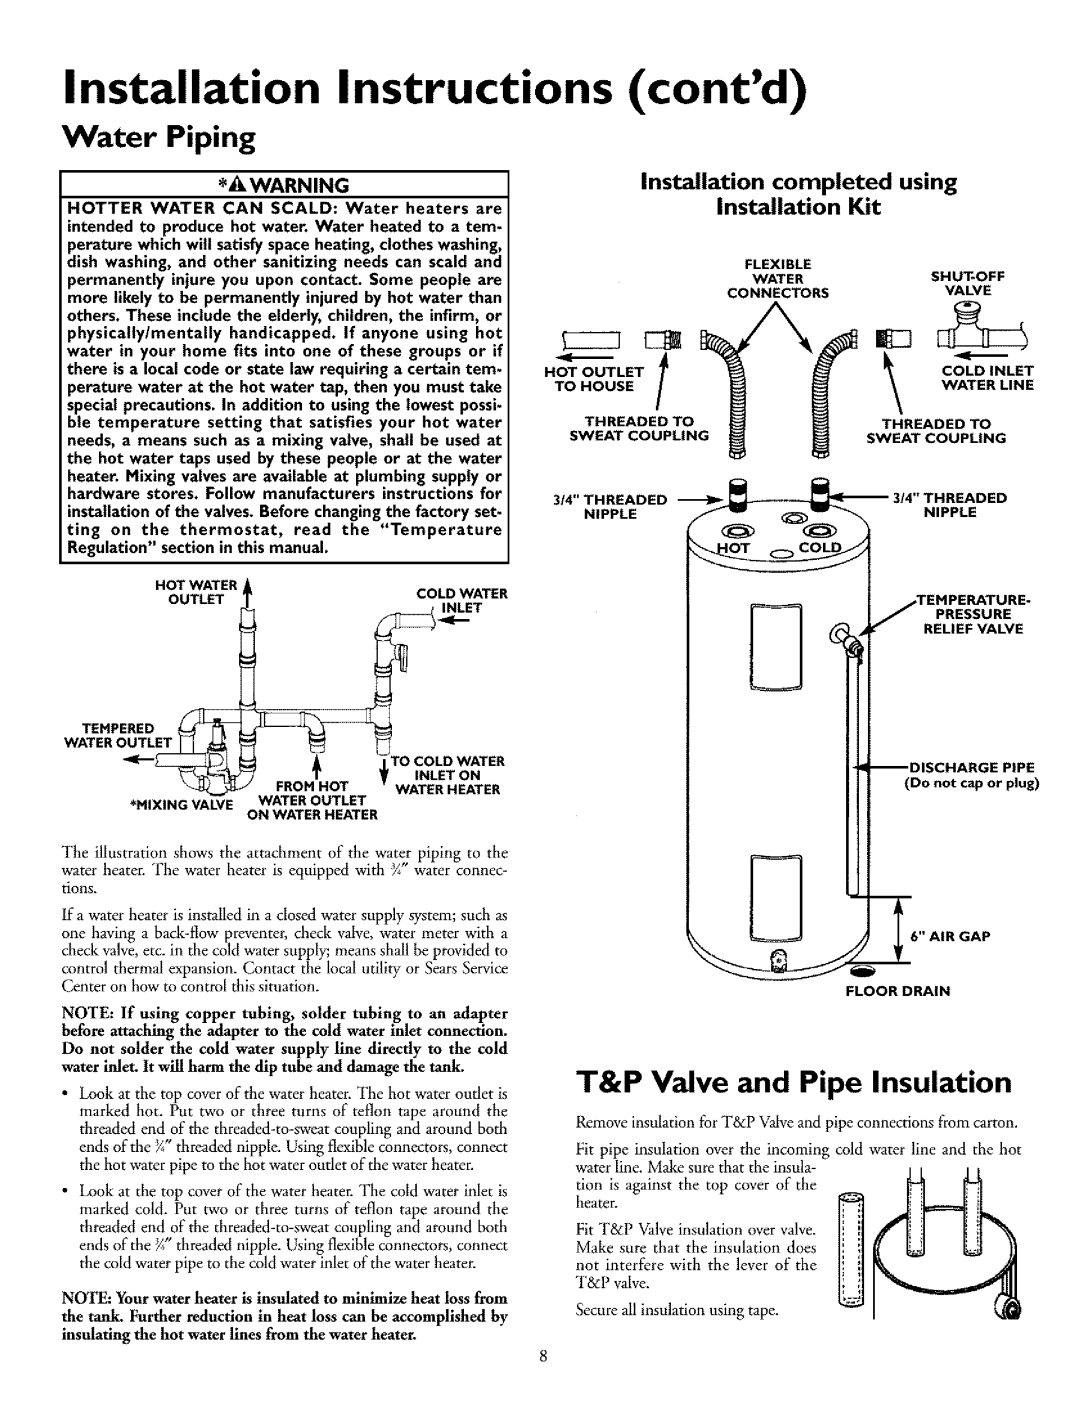 Kenmore 153.326661 Installation Instructions contd, WATEROUT 2a, Water Piping, T&P Valve and Pipe Insulation, using 